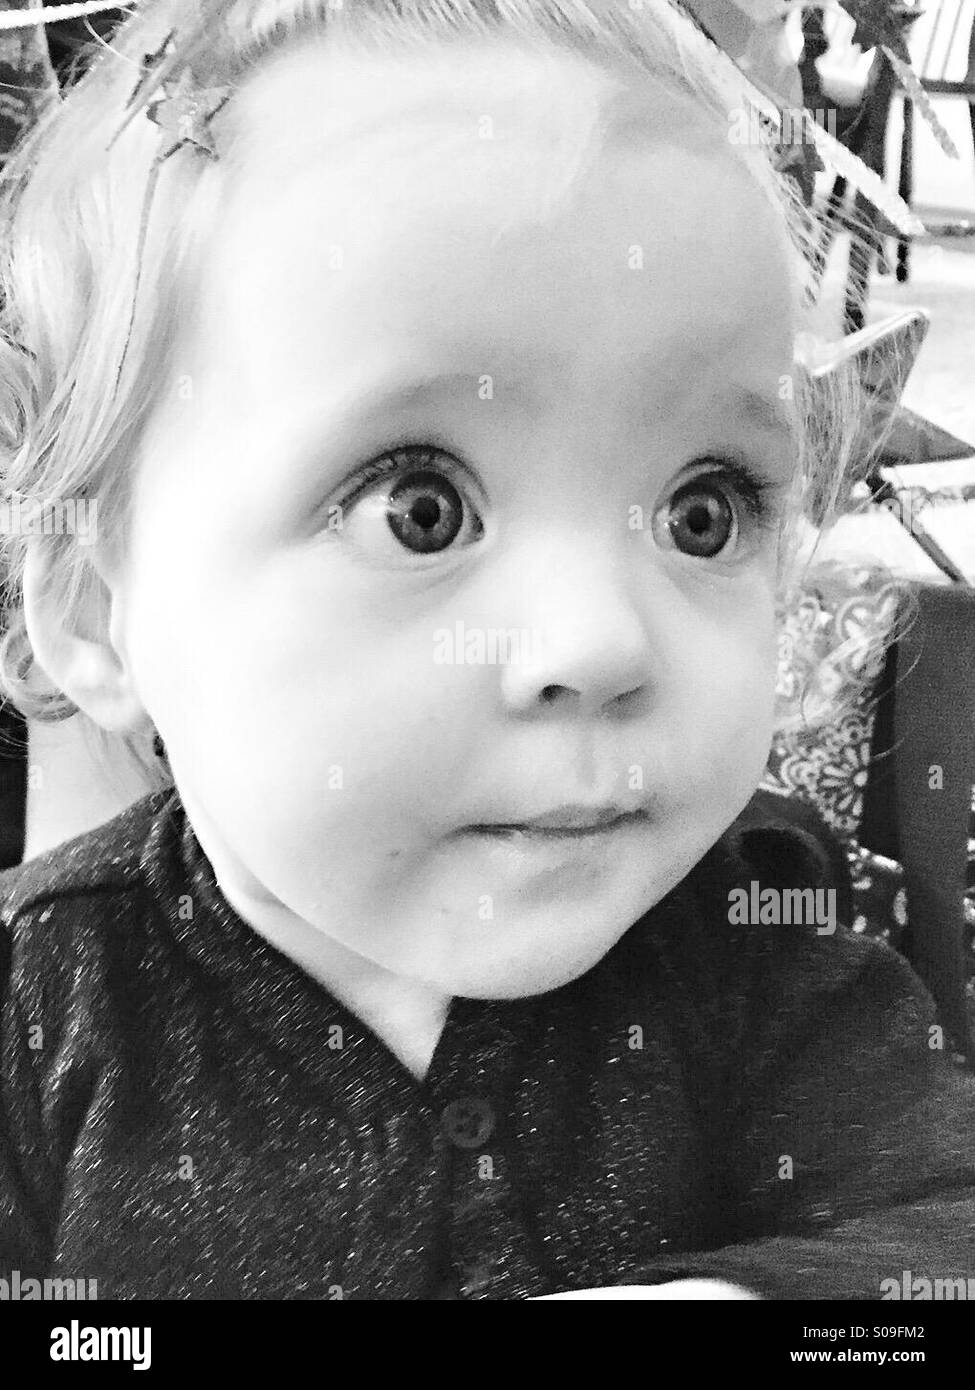 An 11 month old wide-eyed baby girl portrait in black and white. Stock Photo